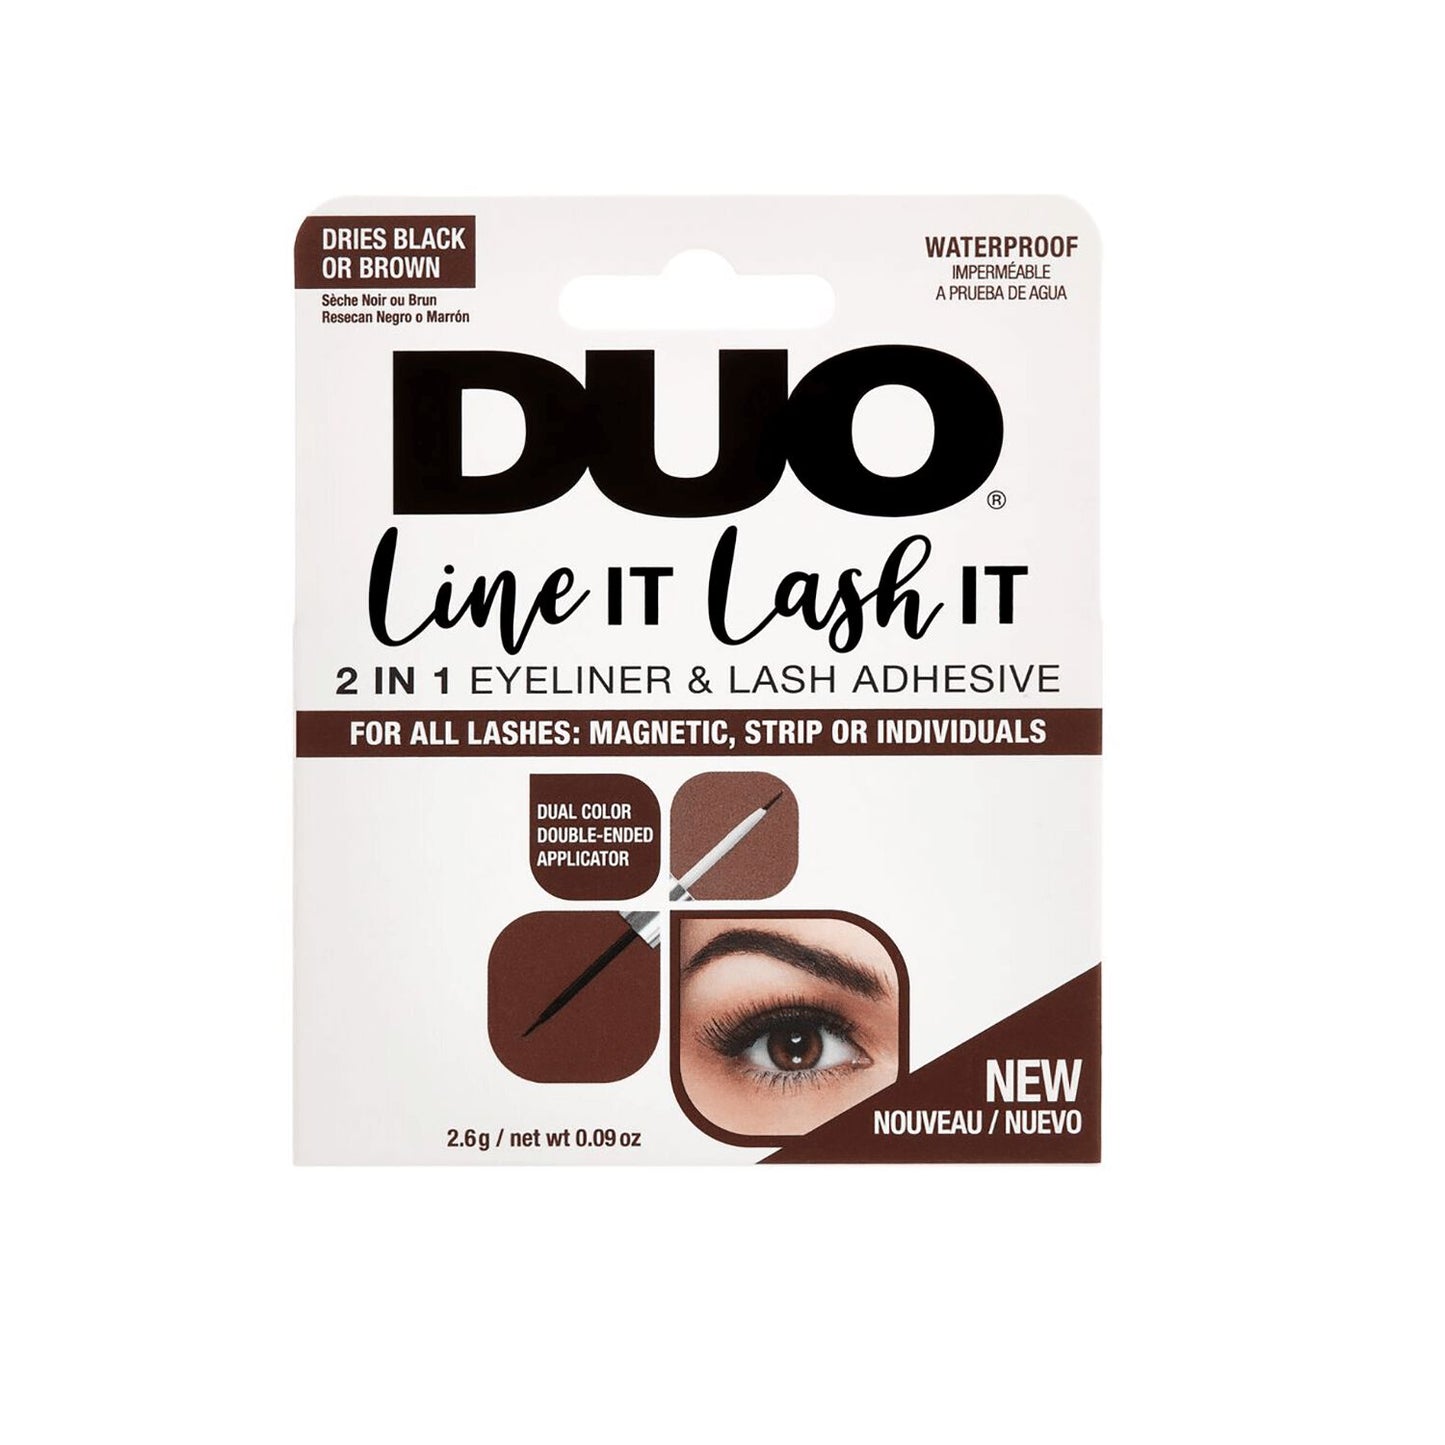 Lash Glue and Remover  by   Ardell DUO Dual Line It Lash It Black & Brown